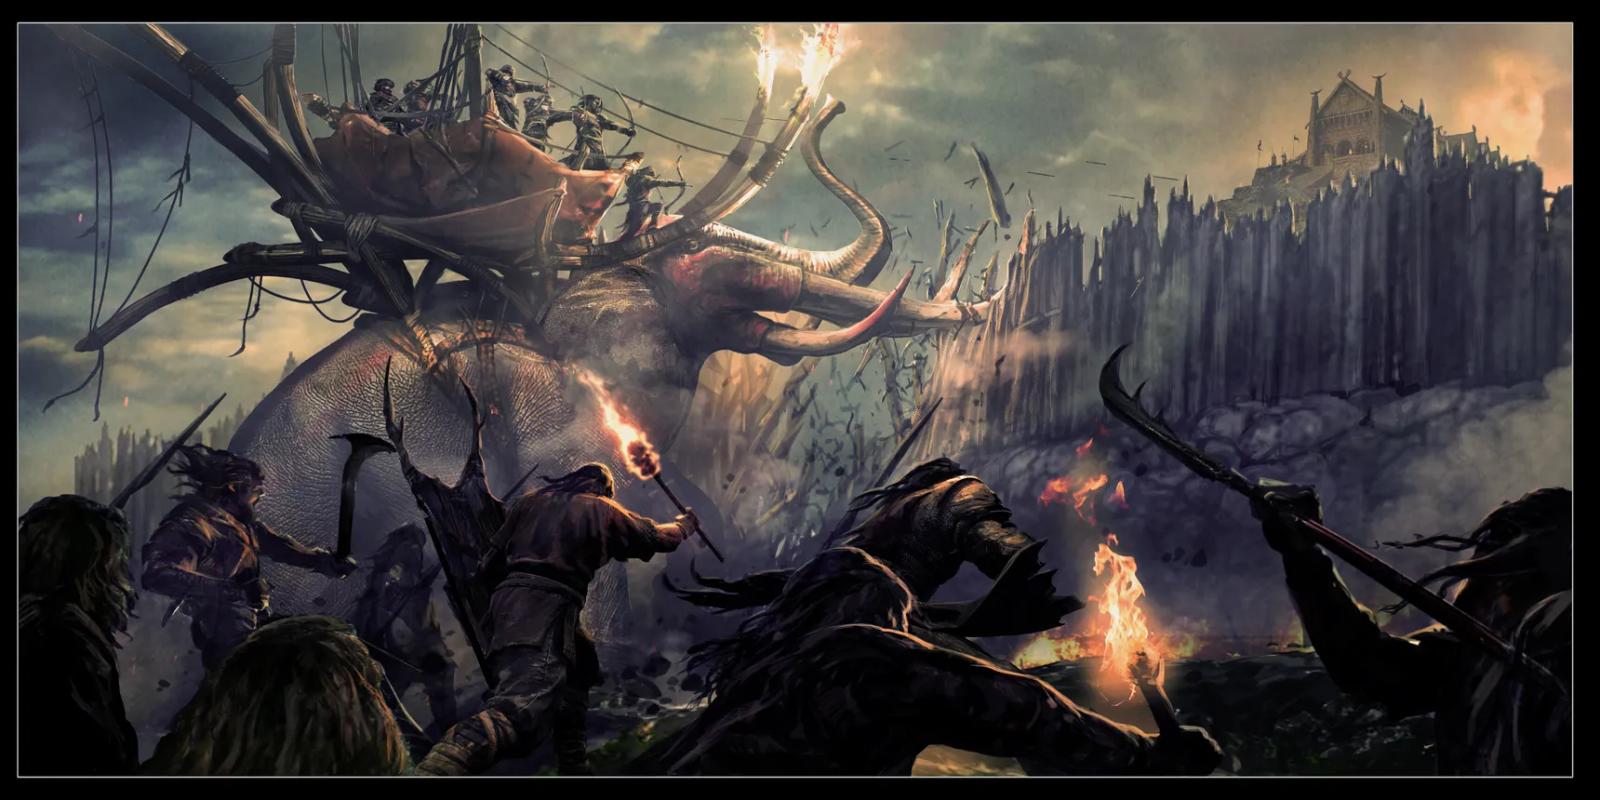 The Lord of the Rings art showcases a group of people riding an elephant.